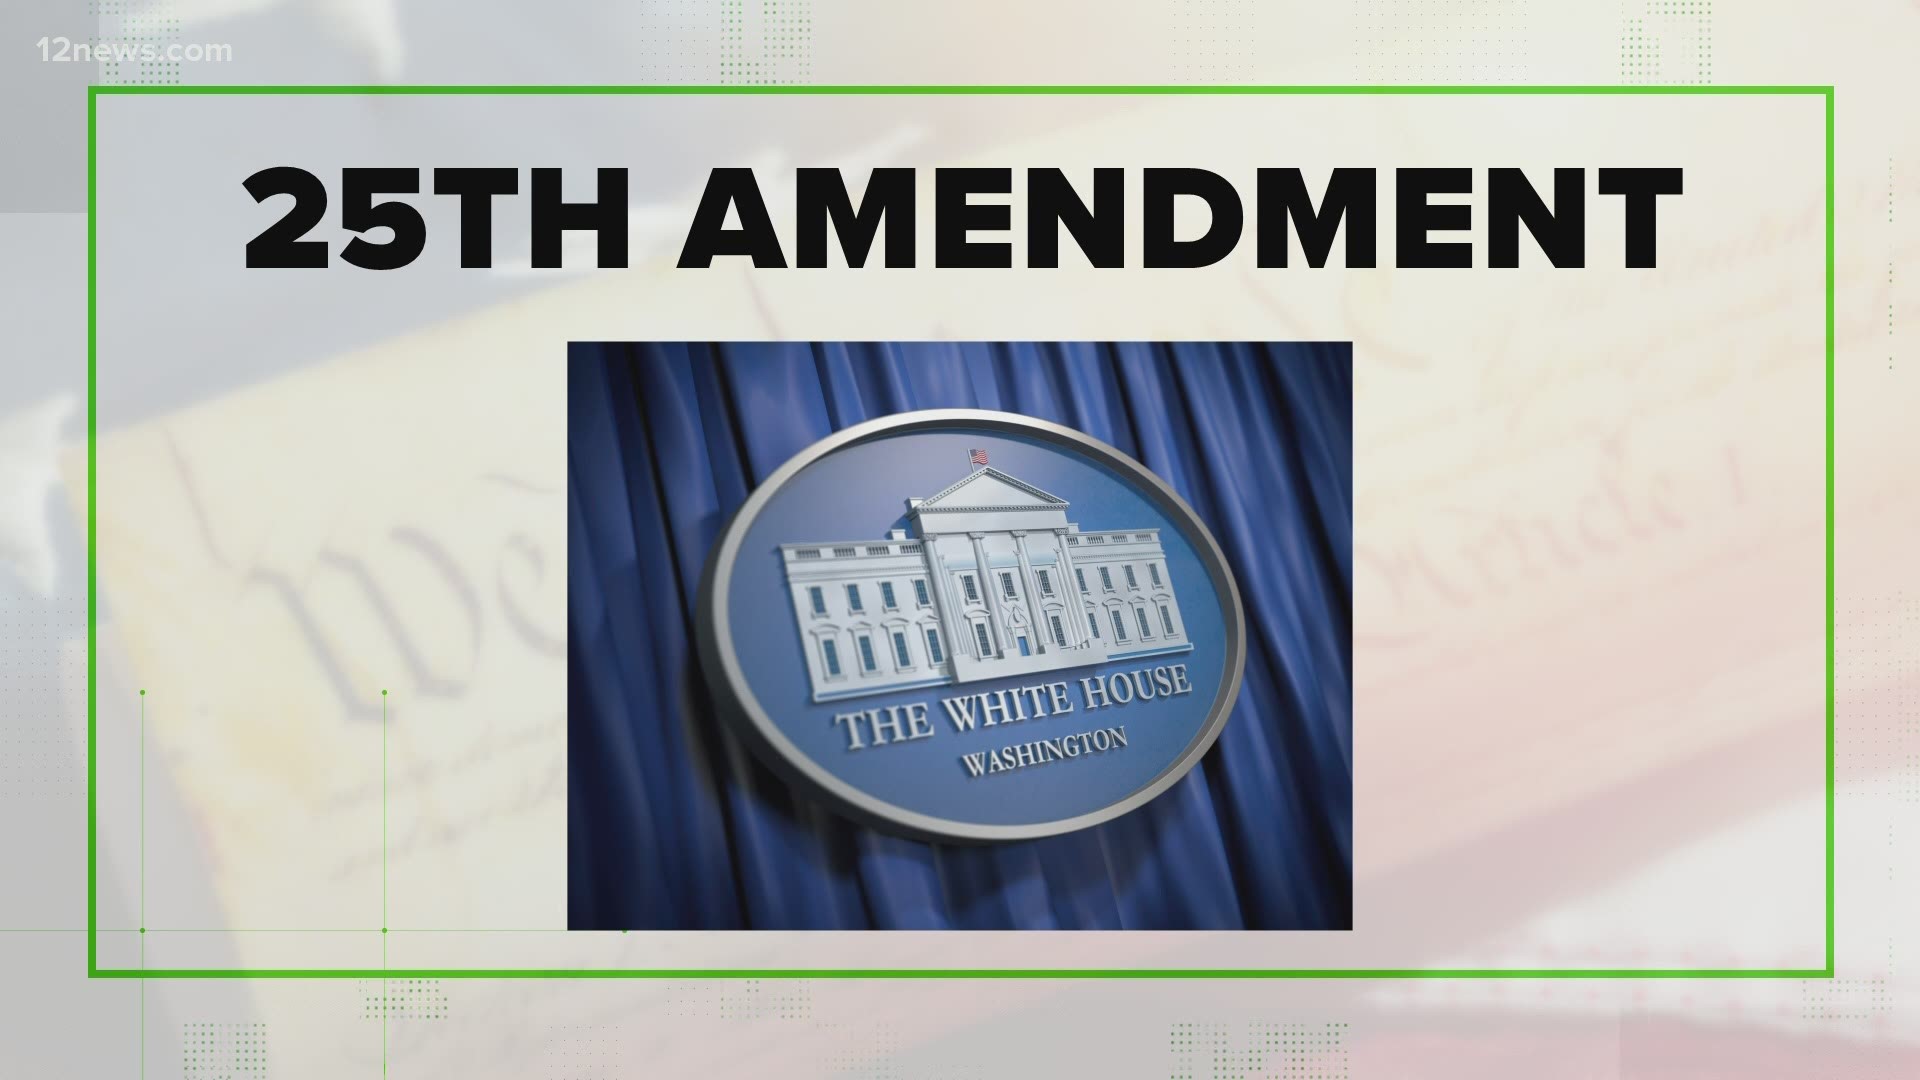 Concerns over the president's health are bringing up questions about the 25th Amendment. We verify what happens if the president is unable to continue his duties.